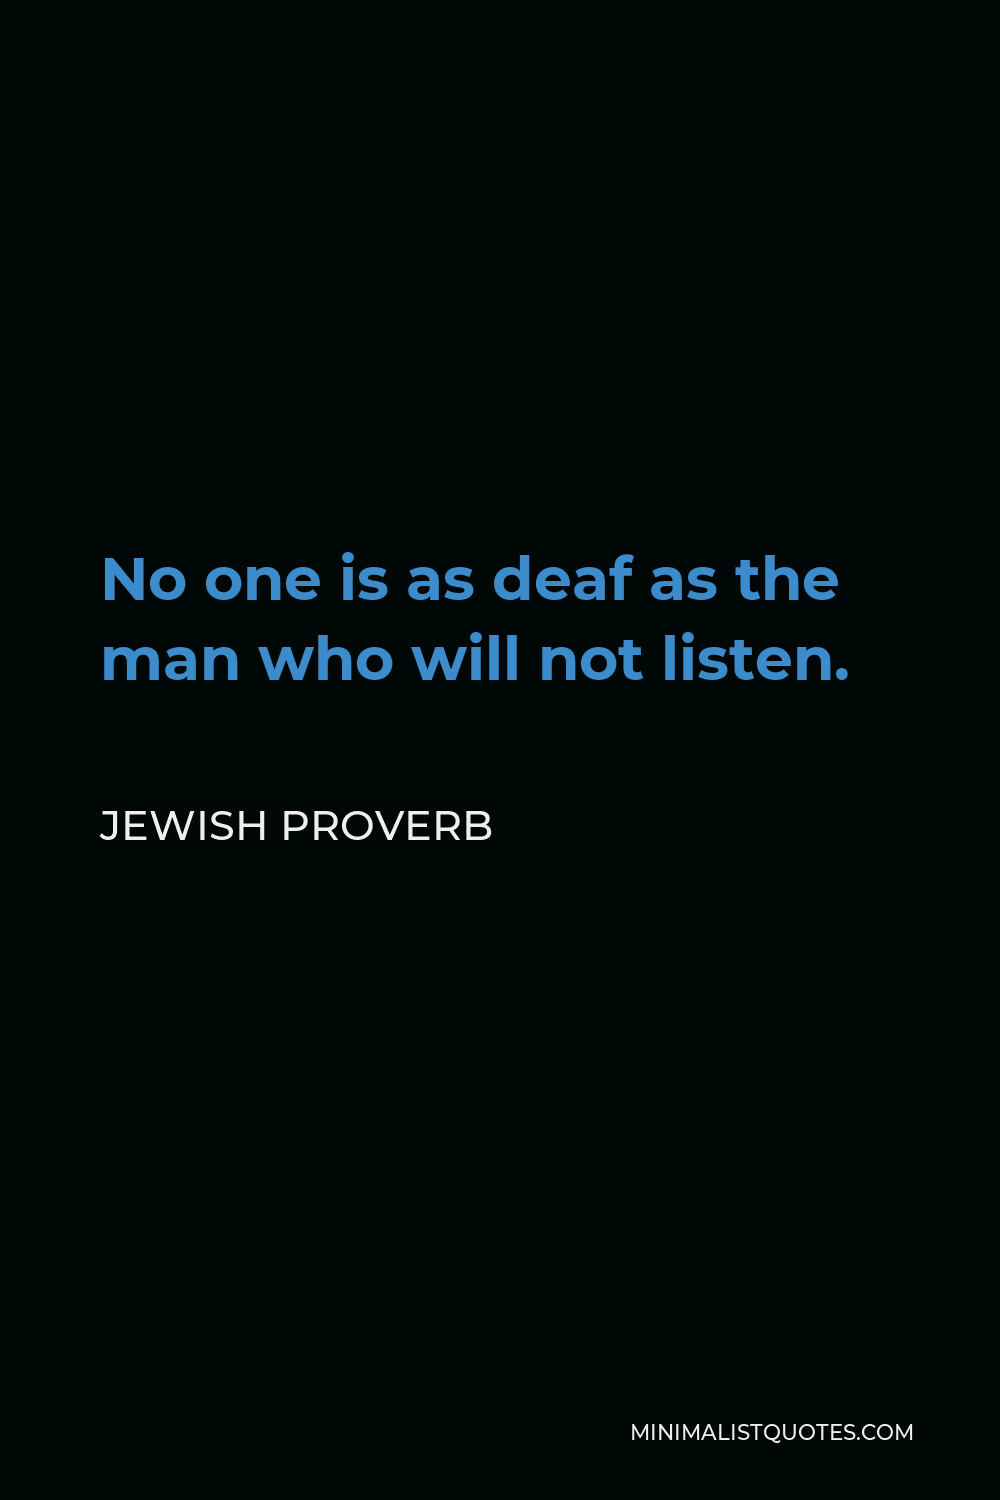 Jewish Proverb Quote - No one is as deaf as the man who will not listen.